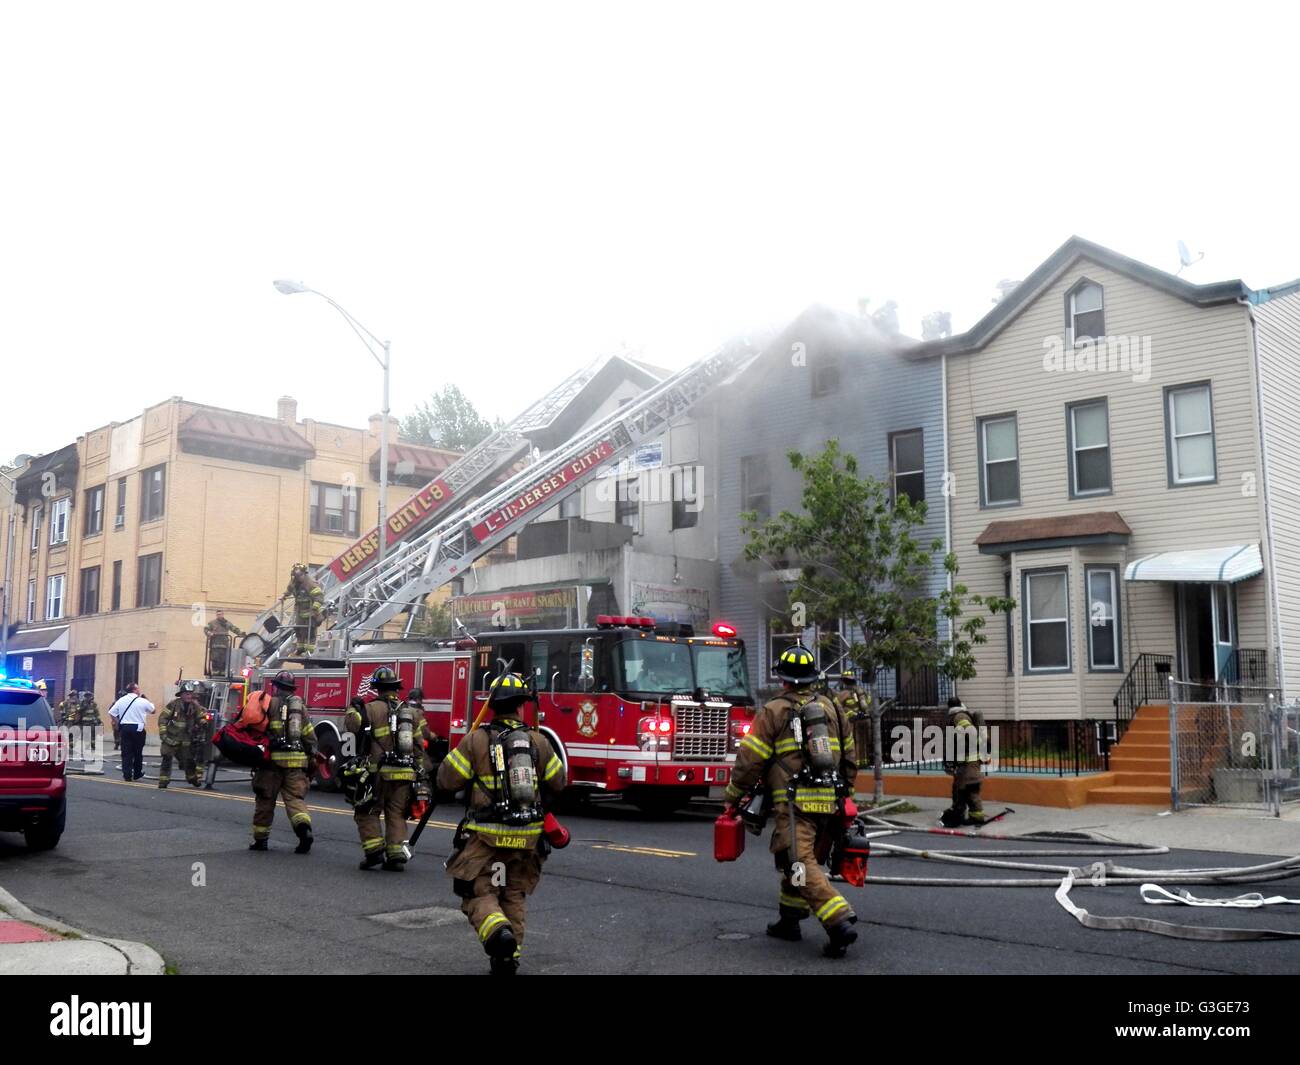 Alarm fire breaks out at 410 West Side Ave in Jersey City, NJ. With at  least one person taken away by ambulance but some reports say as many as  three people were